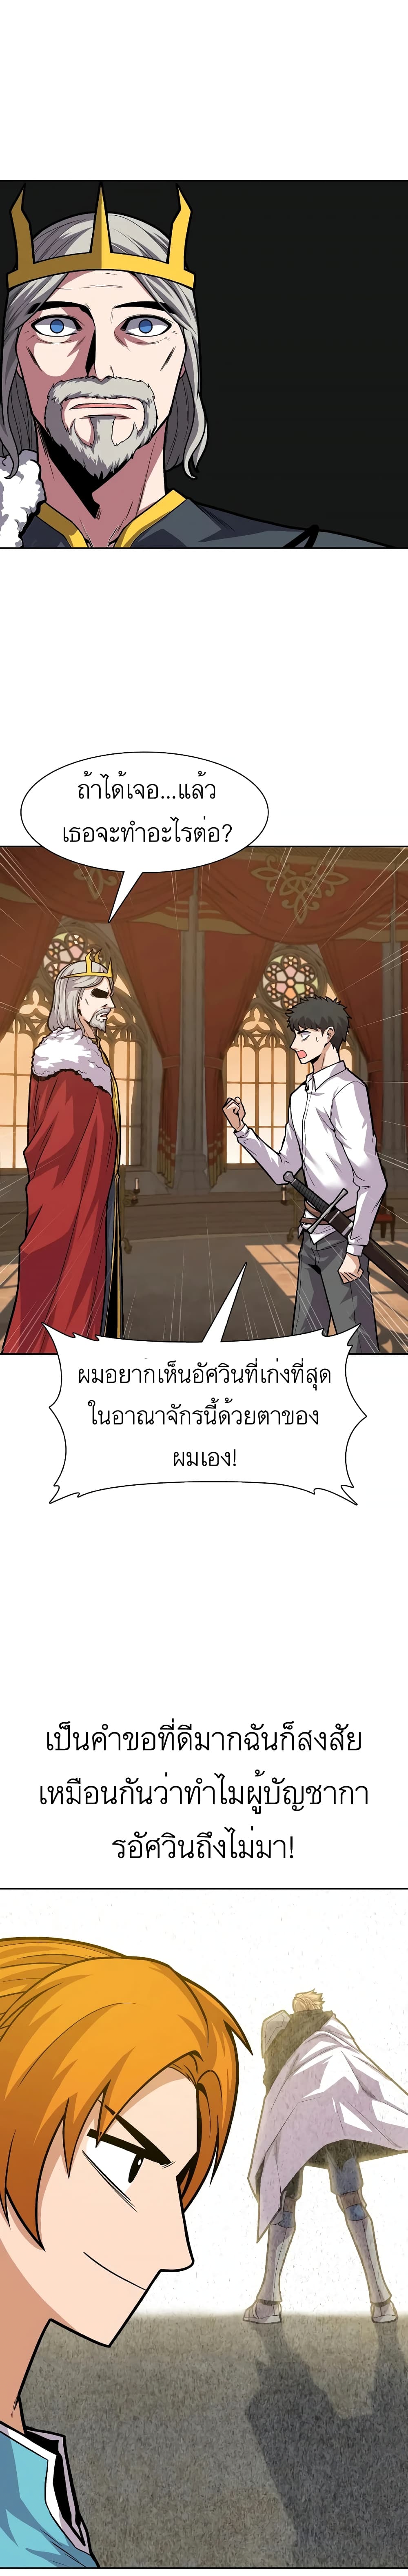 Raising Newbie Heroes In Another World ตอนที่ 7 (21)